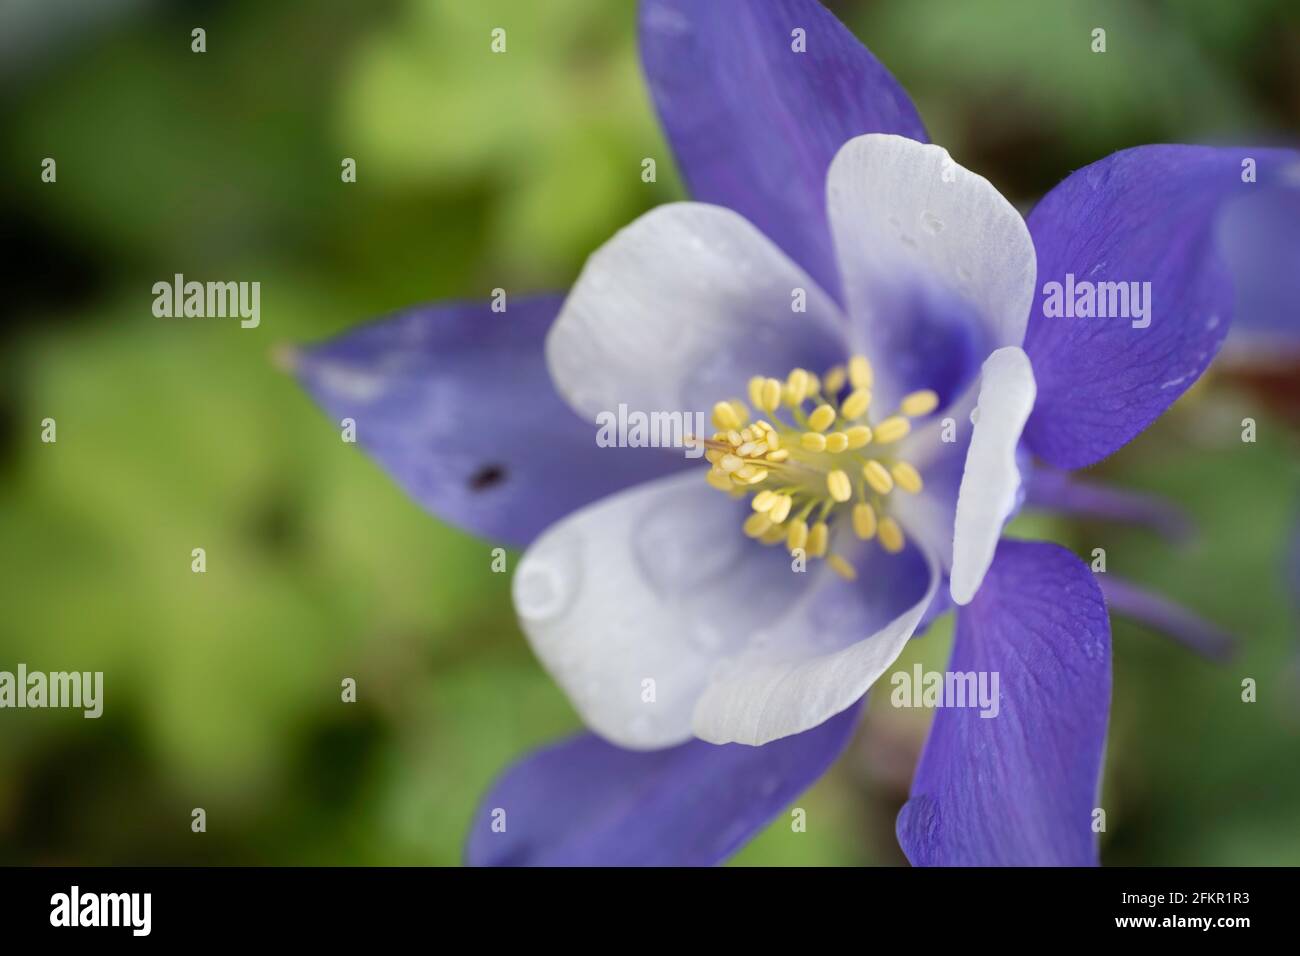 Flower of the Aquilegia, also known as Granny's Bonnet or Columbine. Focus on the yellow stamens and purple petals to the right. Narrow depth of field Stock Photo